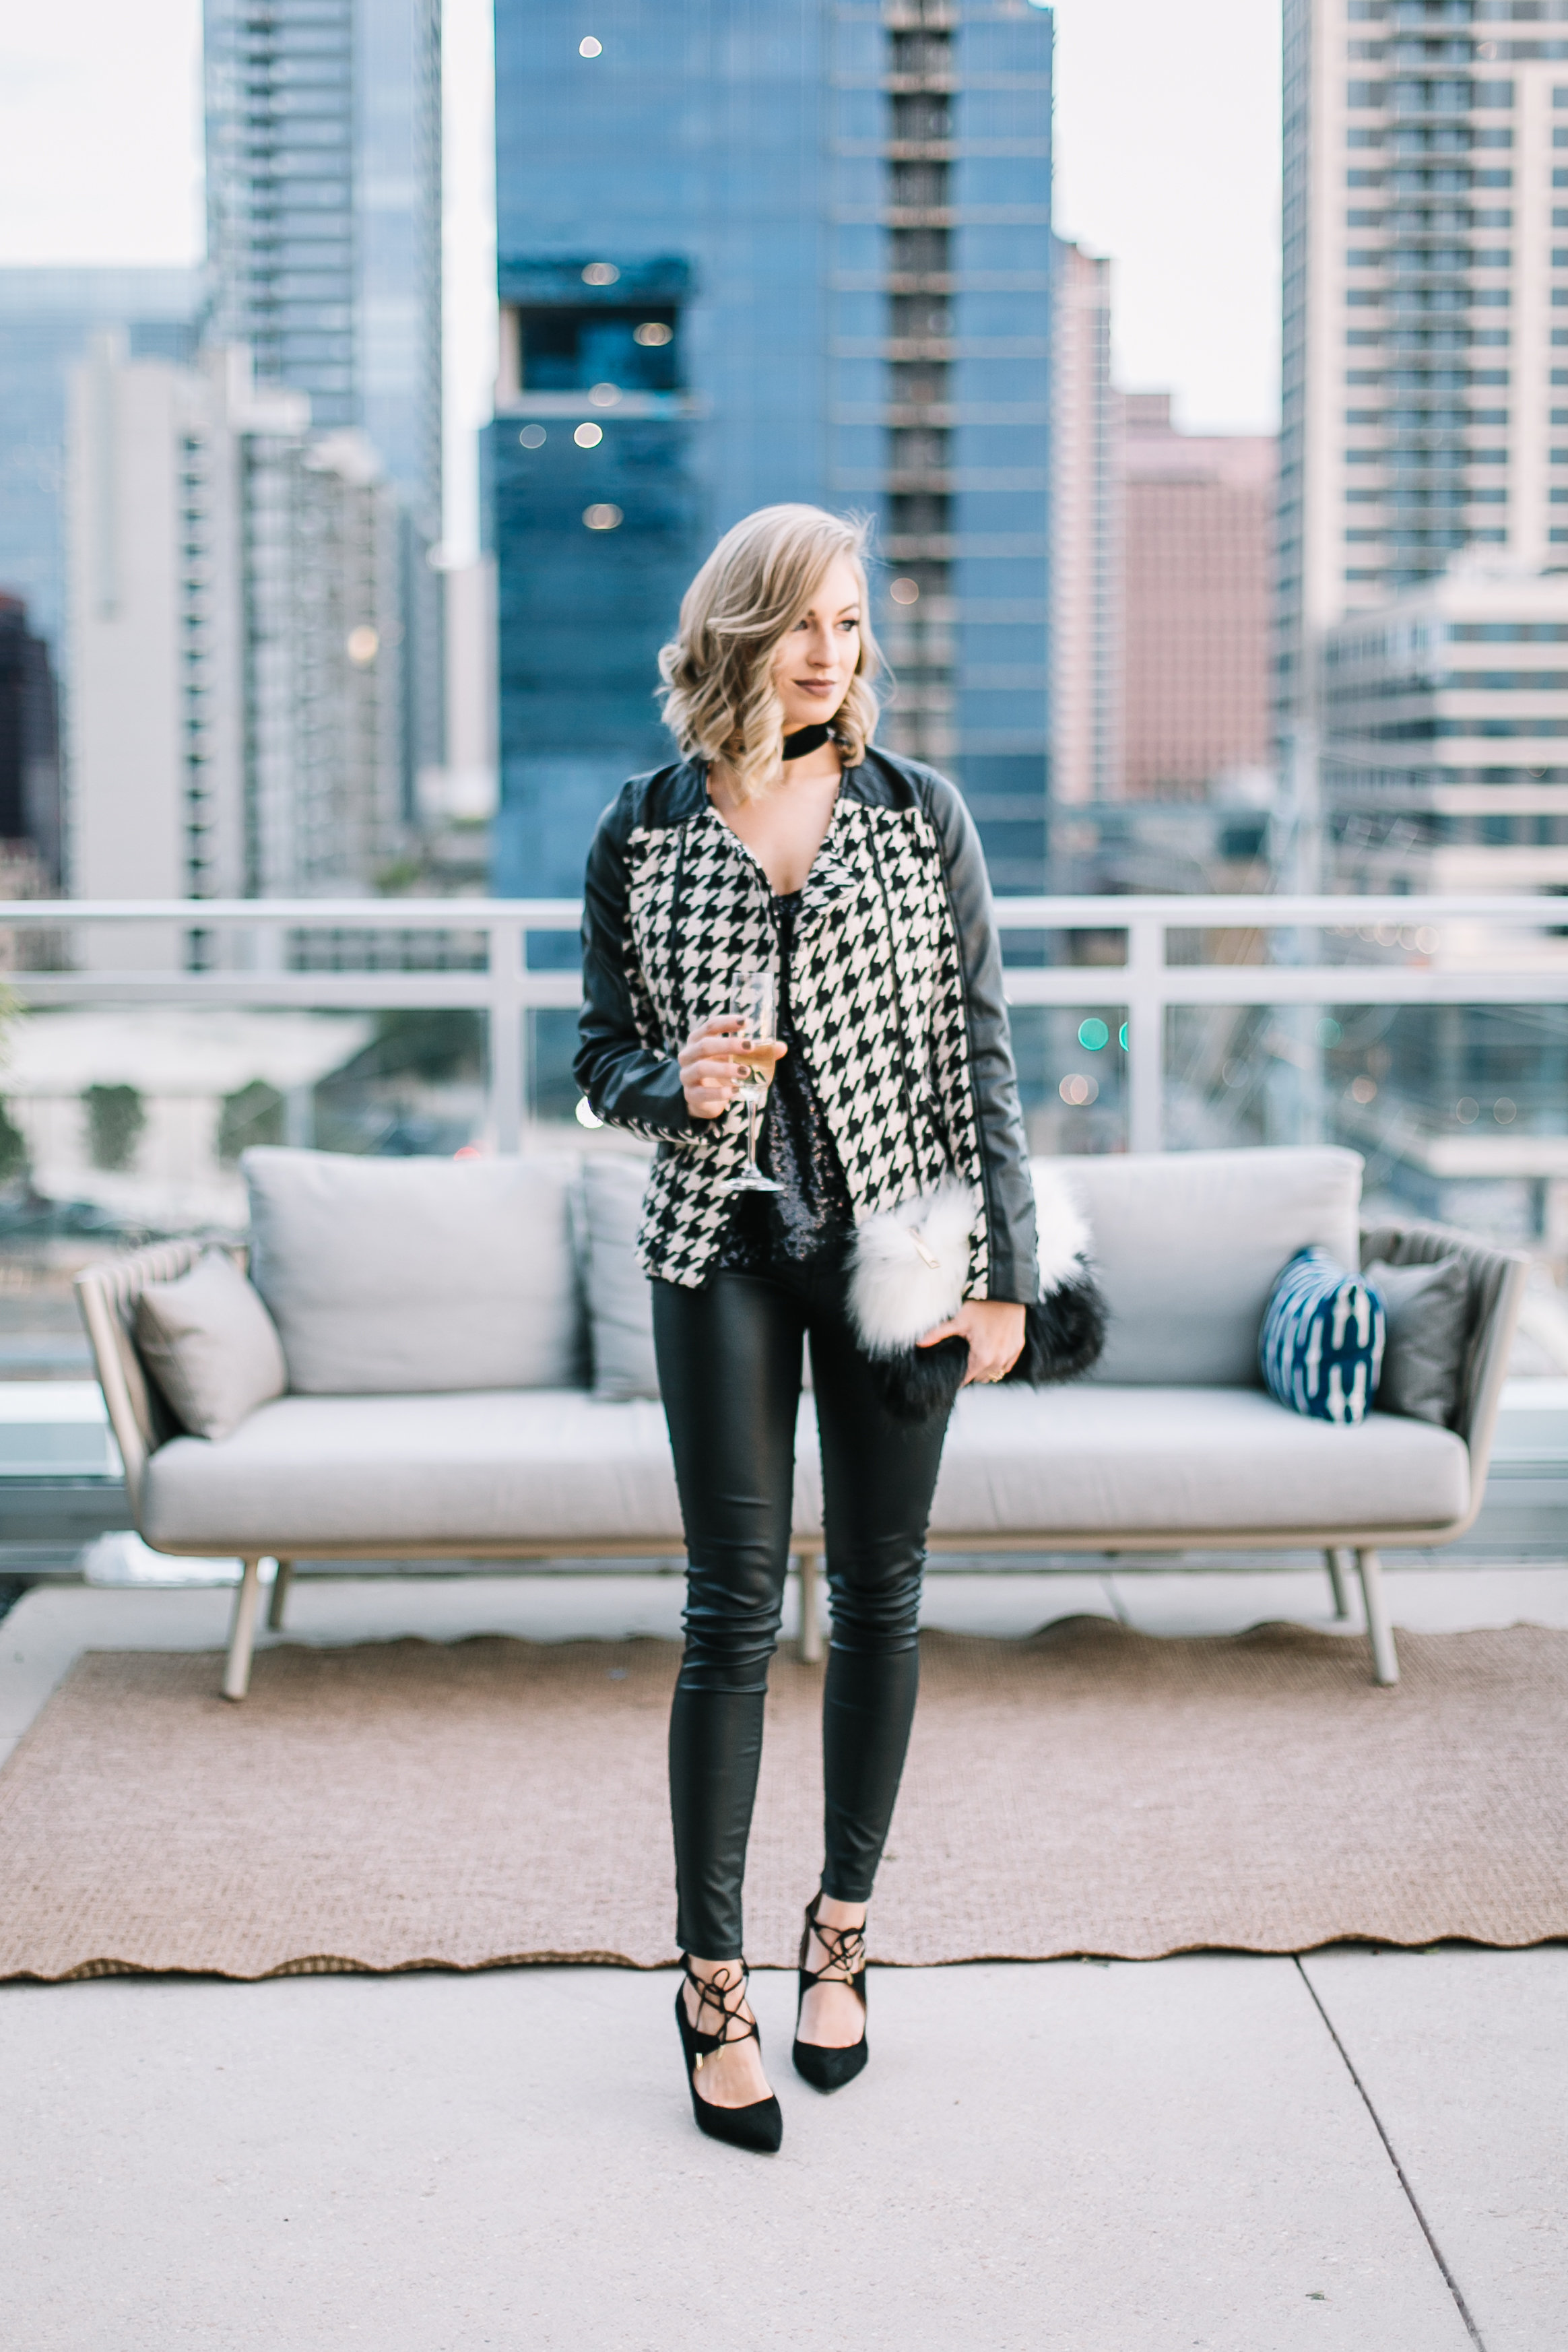 its-me-haylee-black-faux-leather-pants-sequin-top-houndstooth-jacket-black-choker-black-lace-up-heels